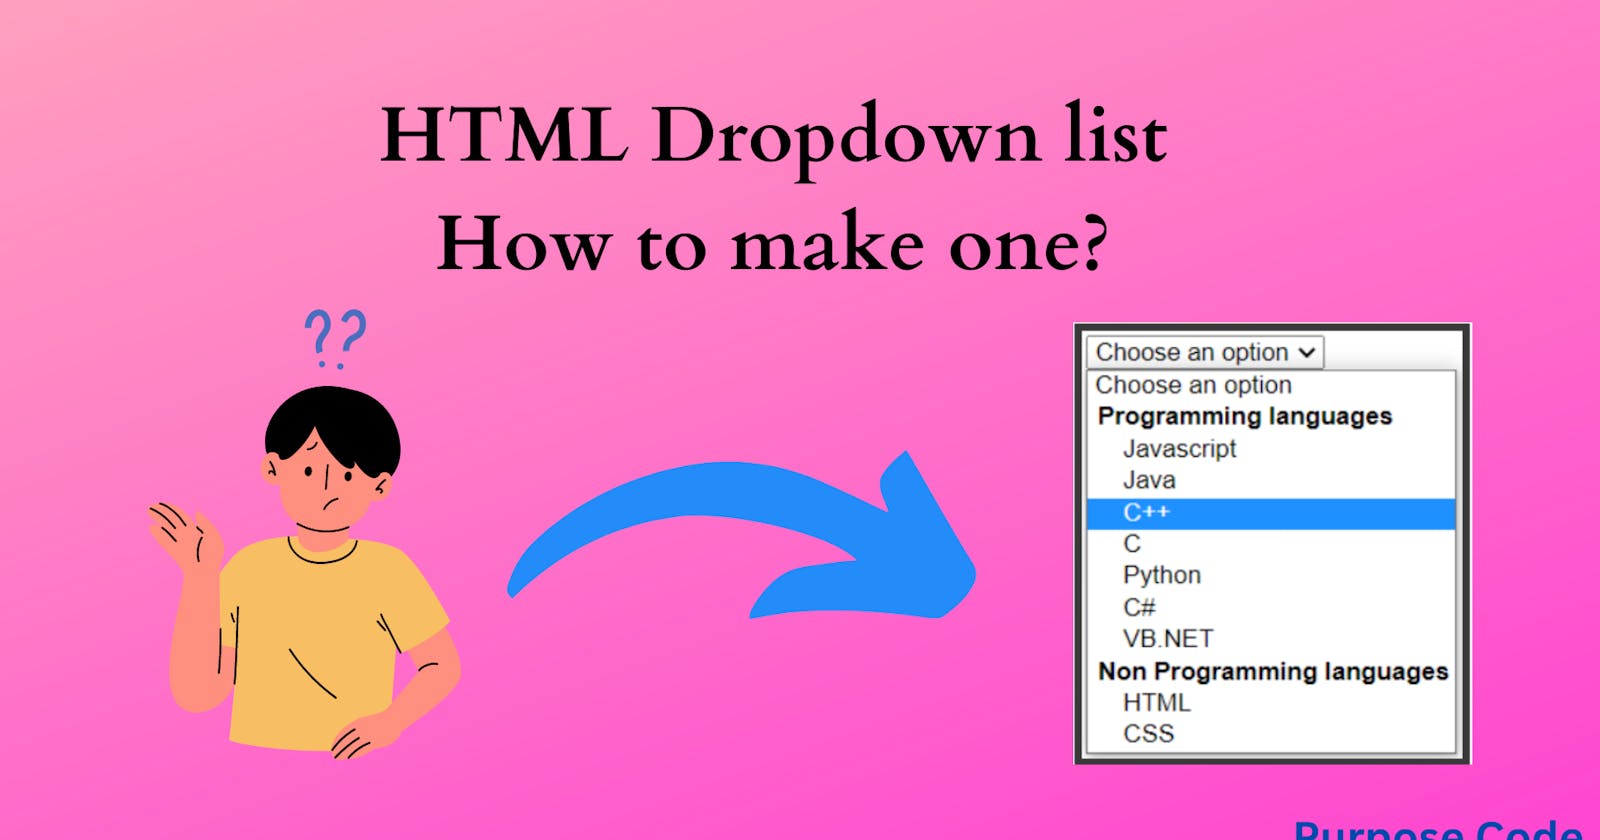 How to build a dropdown list in HTML?